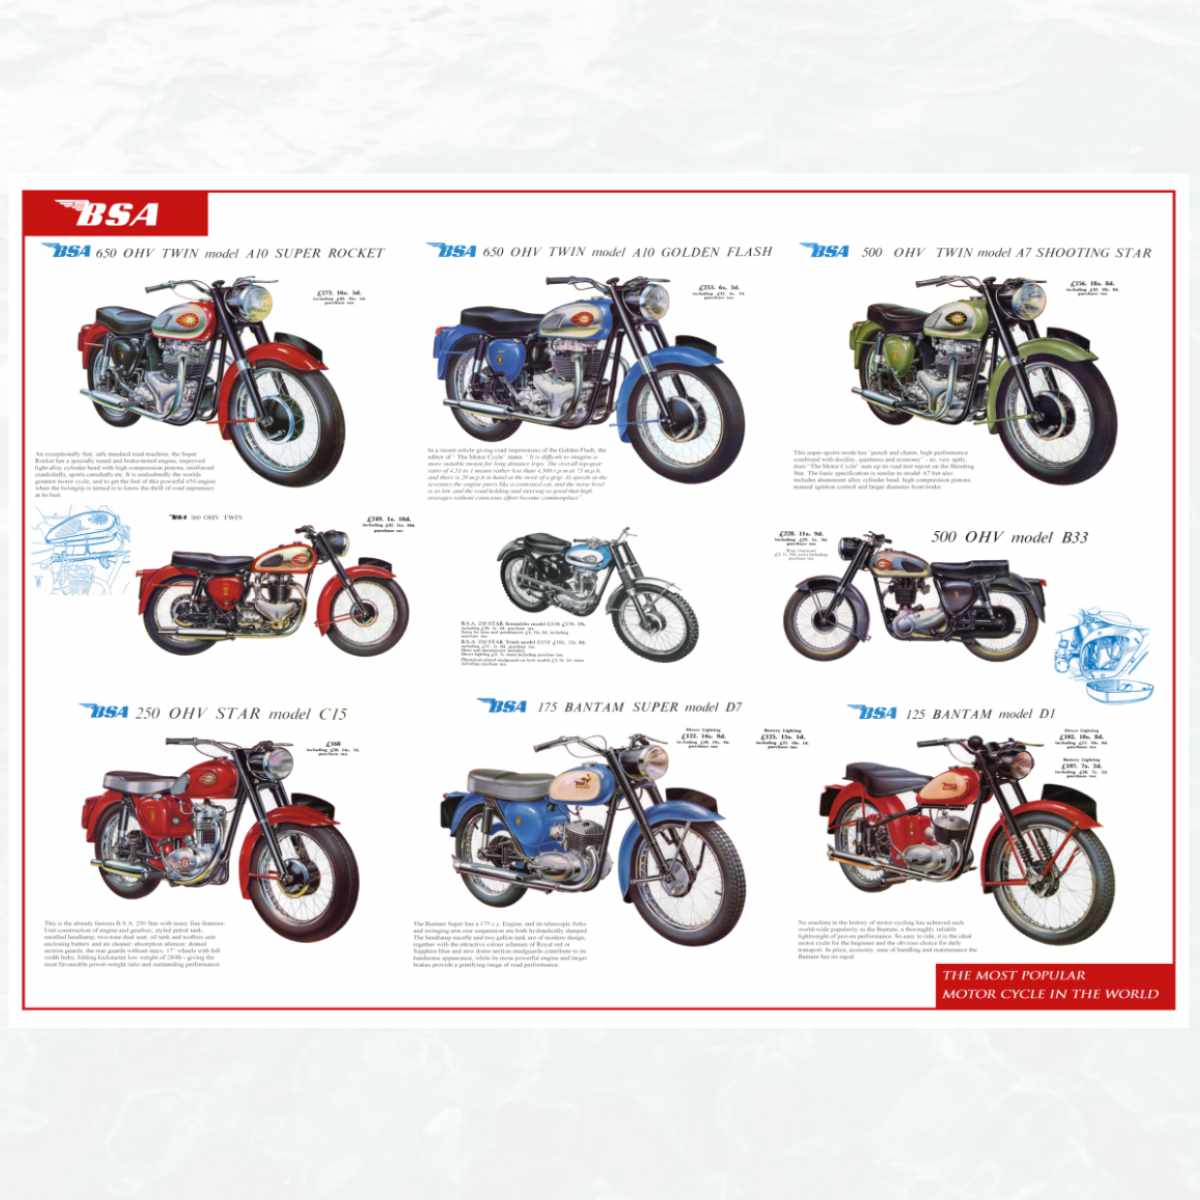 1960 BSA Motorcycle Range Poster . Print available in 3 sizes